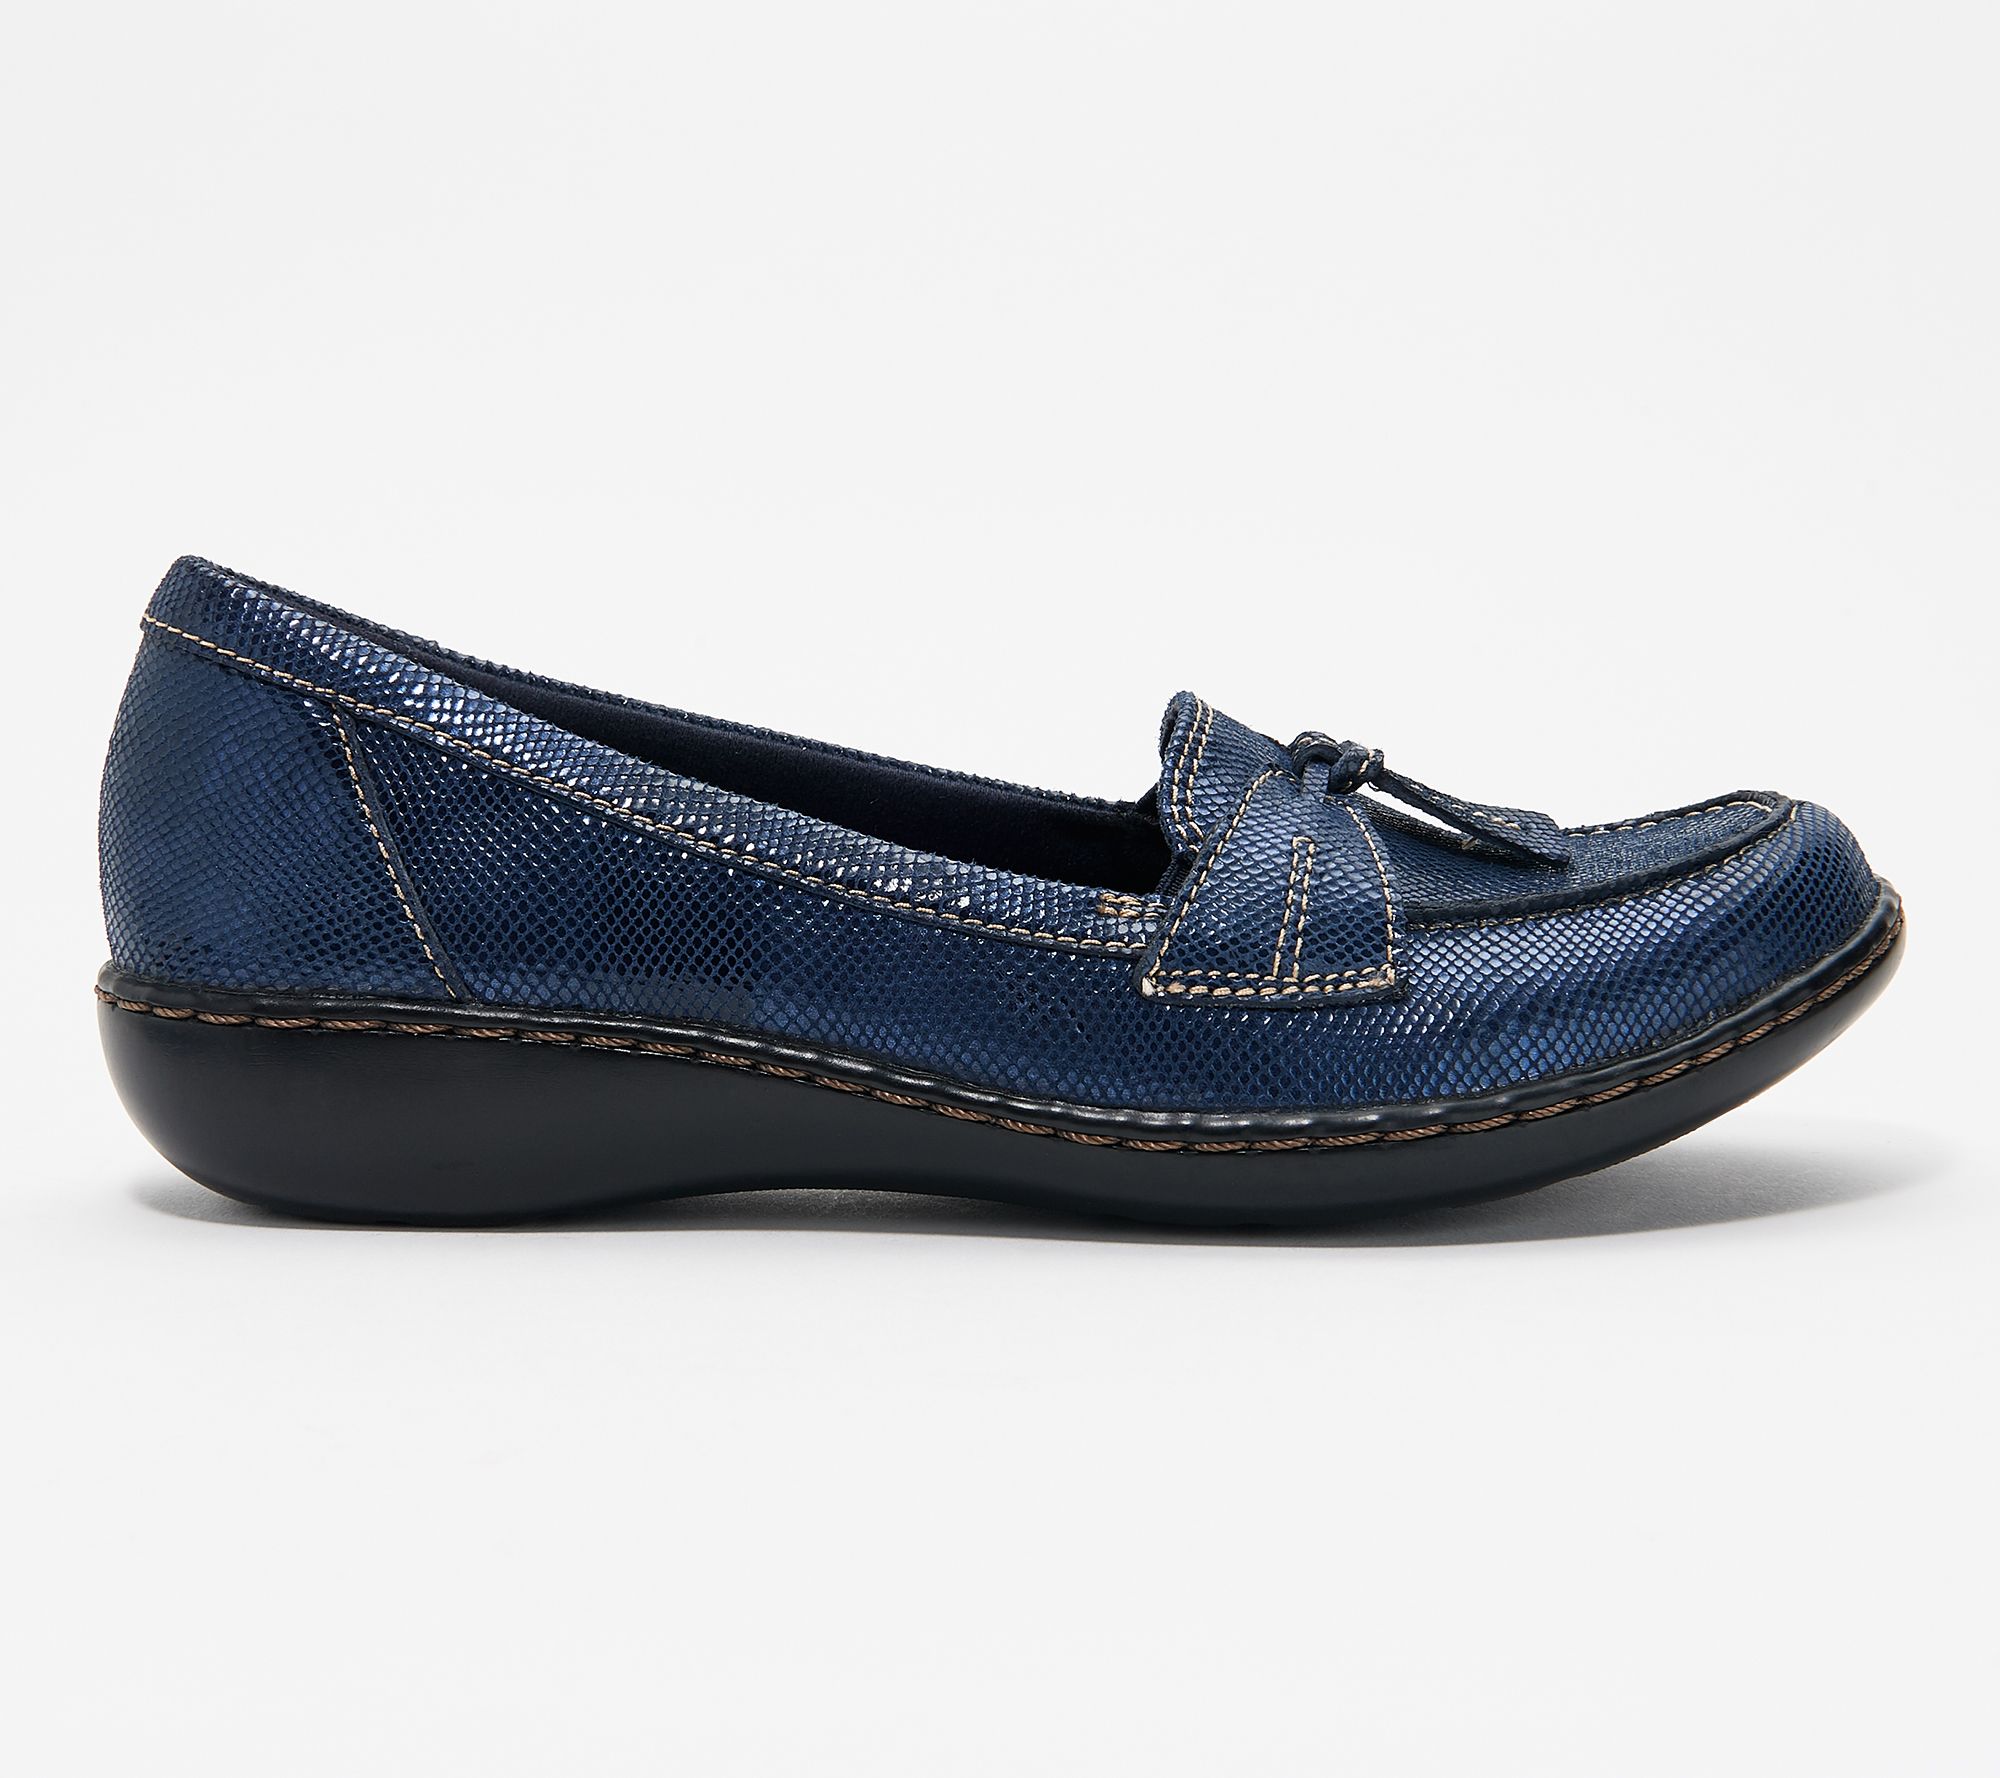 NEW Details about   Clarks Ashland Bubble Loafers in Black Leather Women's